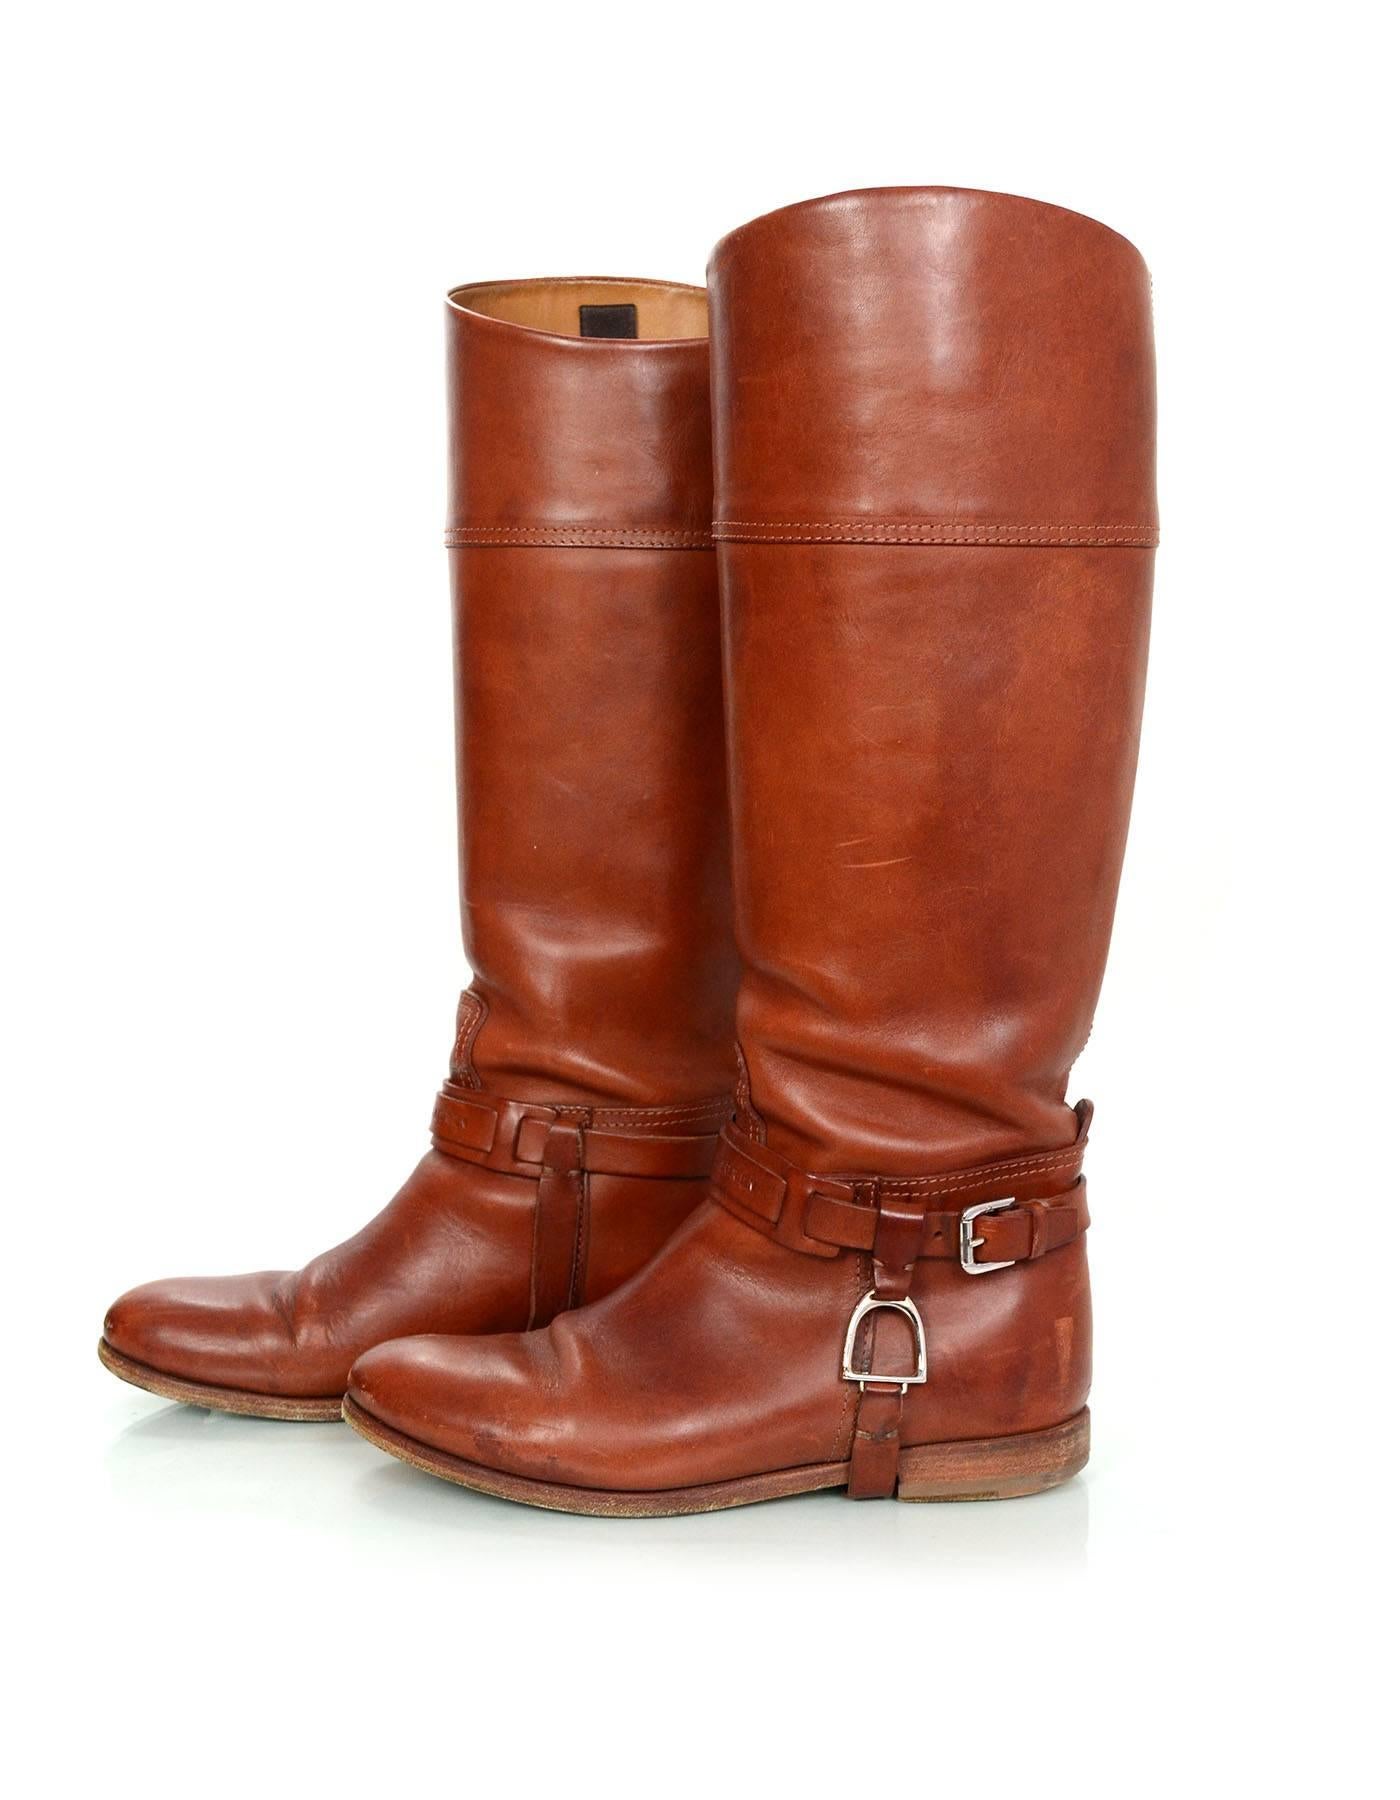 Ralph Lauren Cognac Leather Riding Boots Sz 6.5
Features buckle detail at ankles

Made In: Italy
Color: Cognac
Materials: Leather
Closure/Opening: Pull on 
Sole Stamp: Made in Italy 6.5
Overall Condition: Very good pre-owned condition with